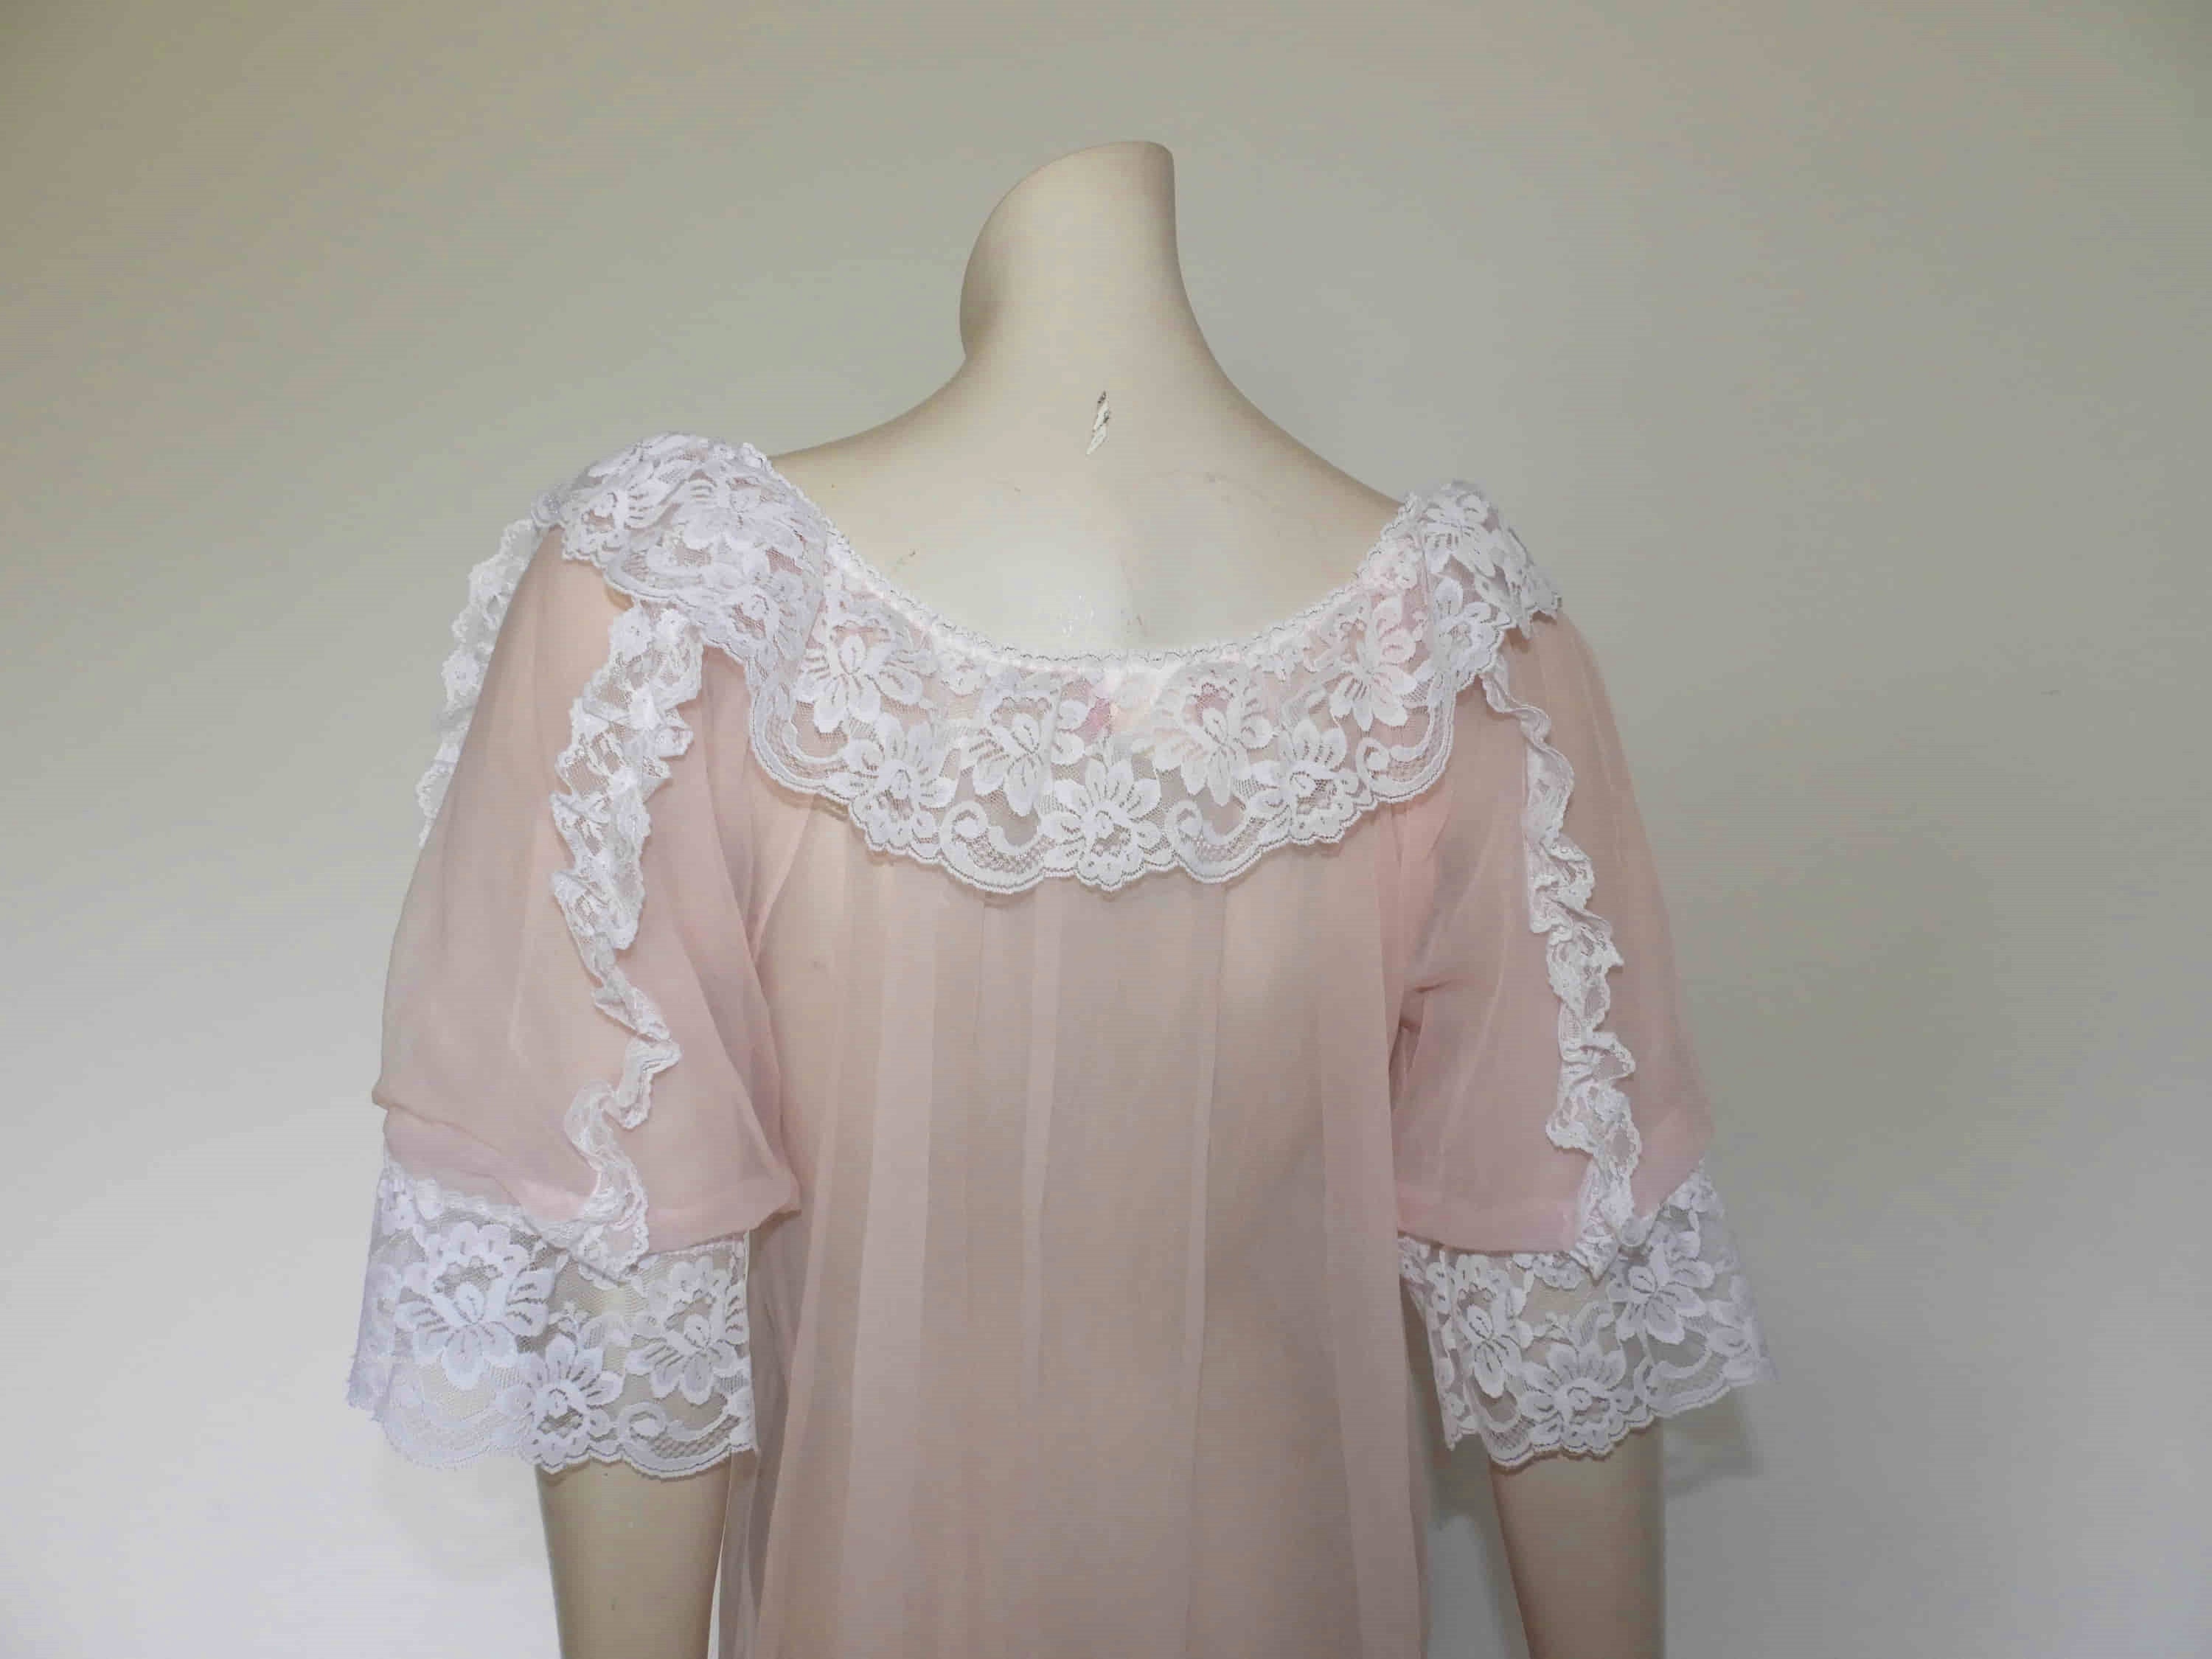 1990s vintage sheer pink peignoir robe with white lace by la loire medium